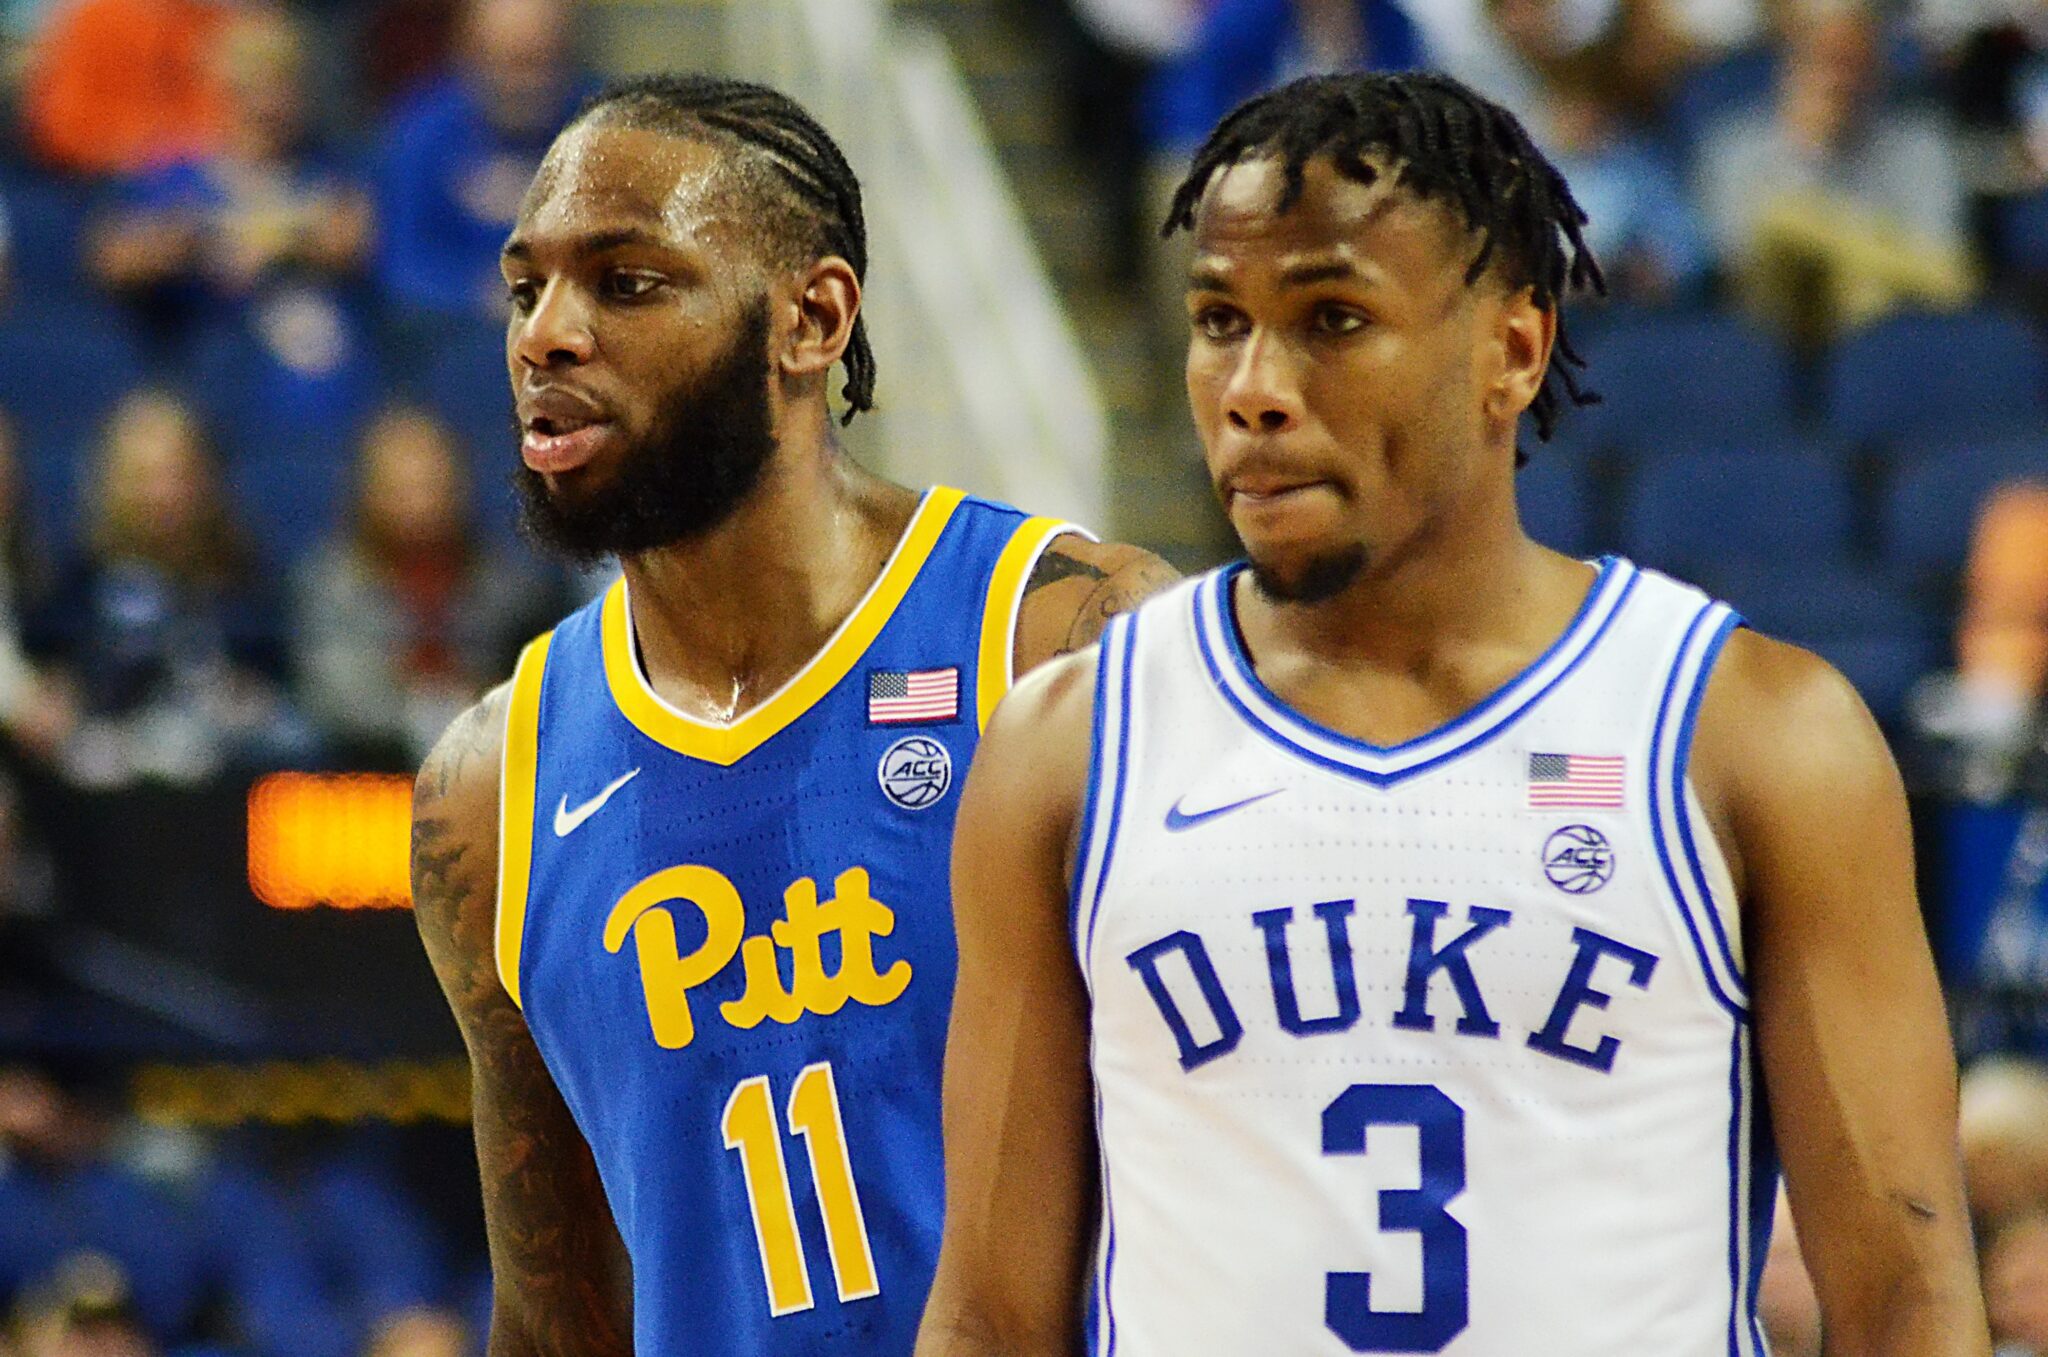 Jamarius Burton and Jeremy Roach as Pitt faces Duke in the ACC Tournament quarterfinals in Greensboro, N.C. on March 9, 2023. (Mitchell Northam / Pittsburgh Sports Now)